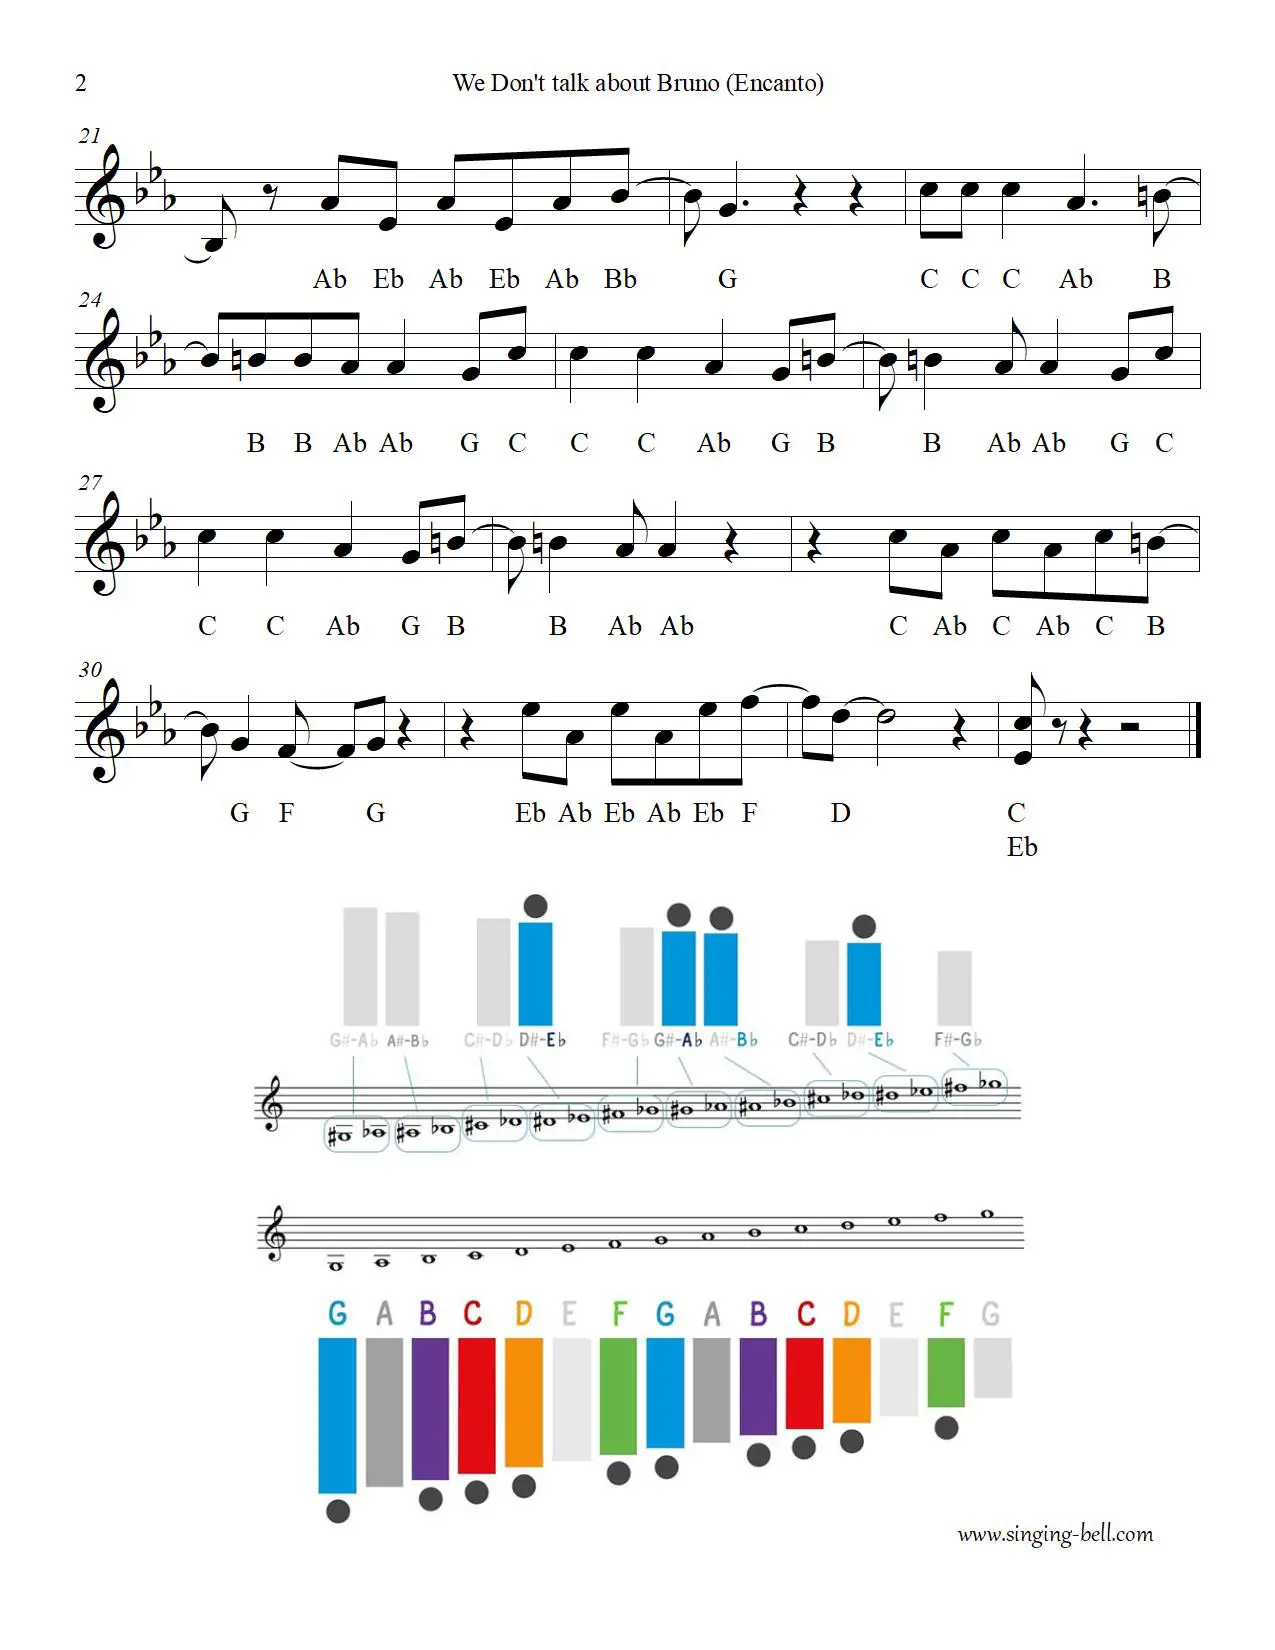 We Don't Talk About Bruno_2 free xylophone glockenspiel sheet music notes chart pdf